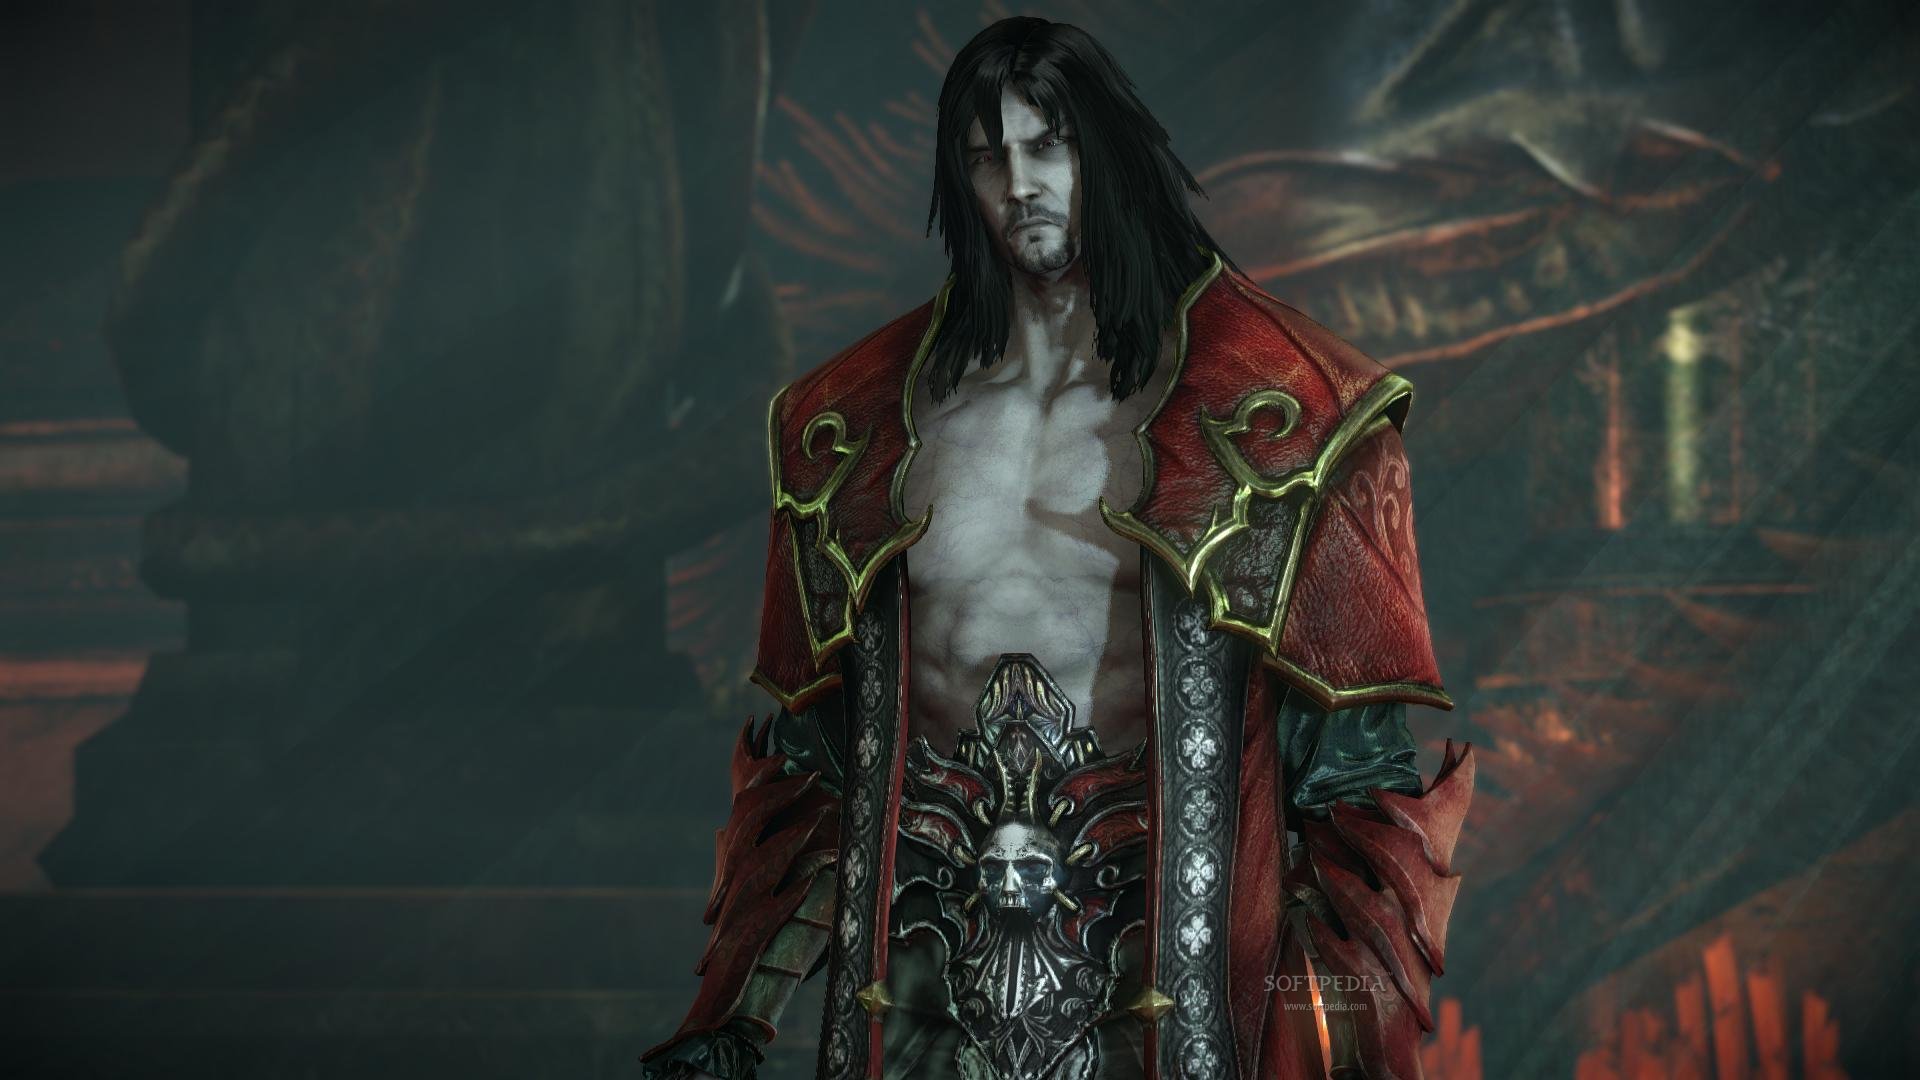 CASTLEVANIA Lords of Shadow 2 - All Bosses (With Cutscenes) [2K 60FPS] 